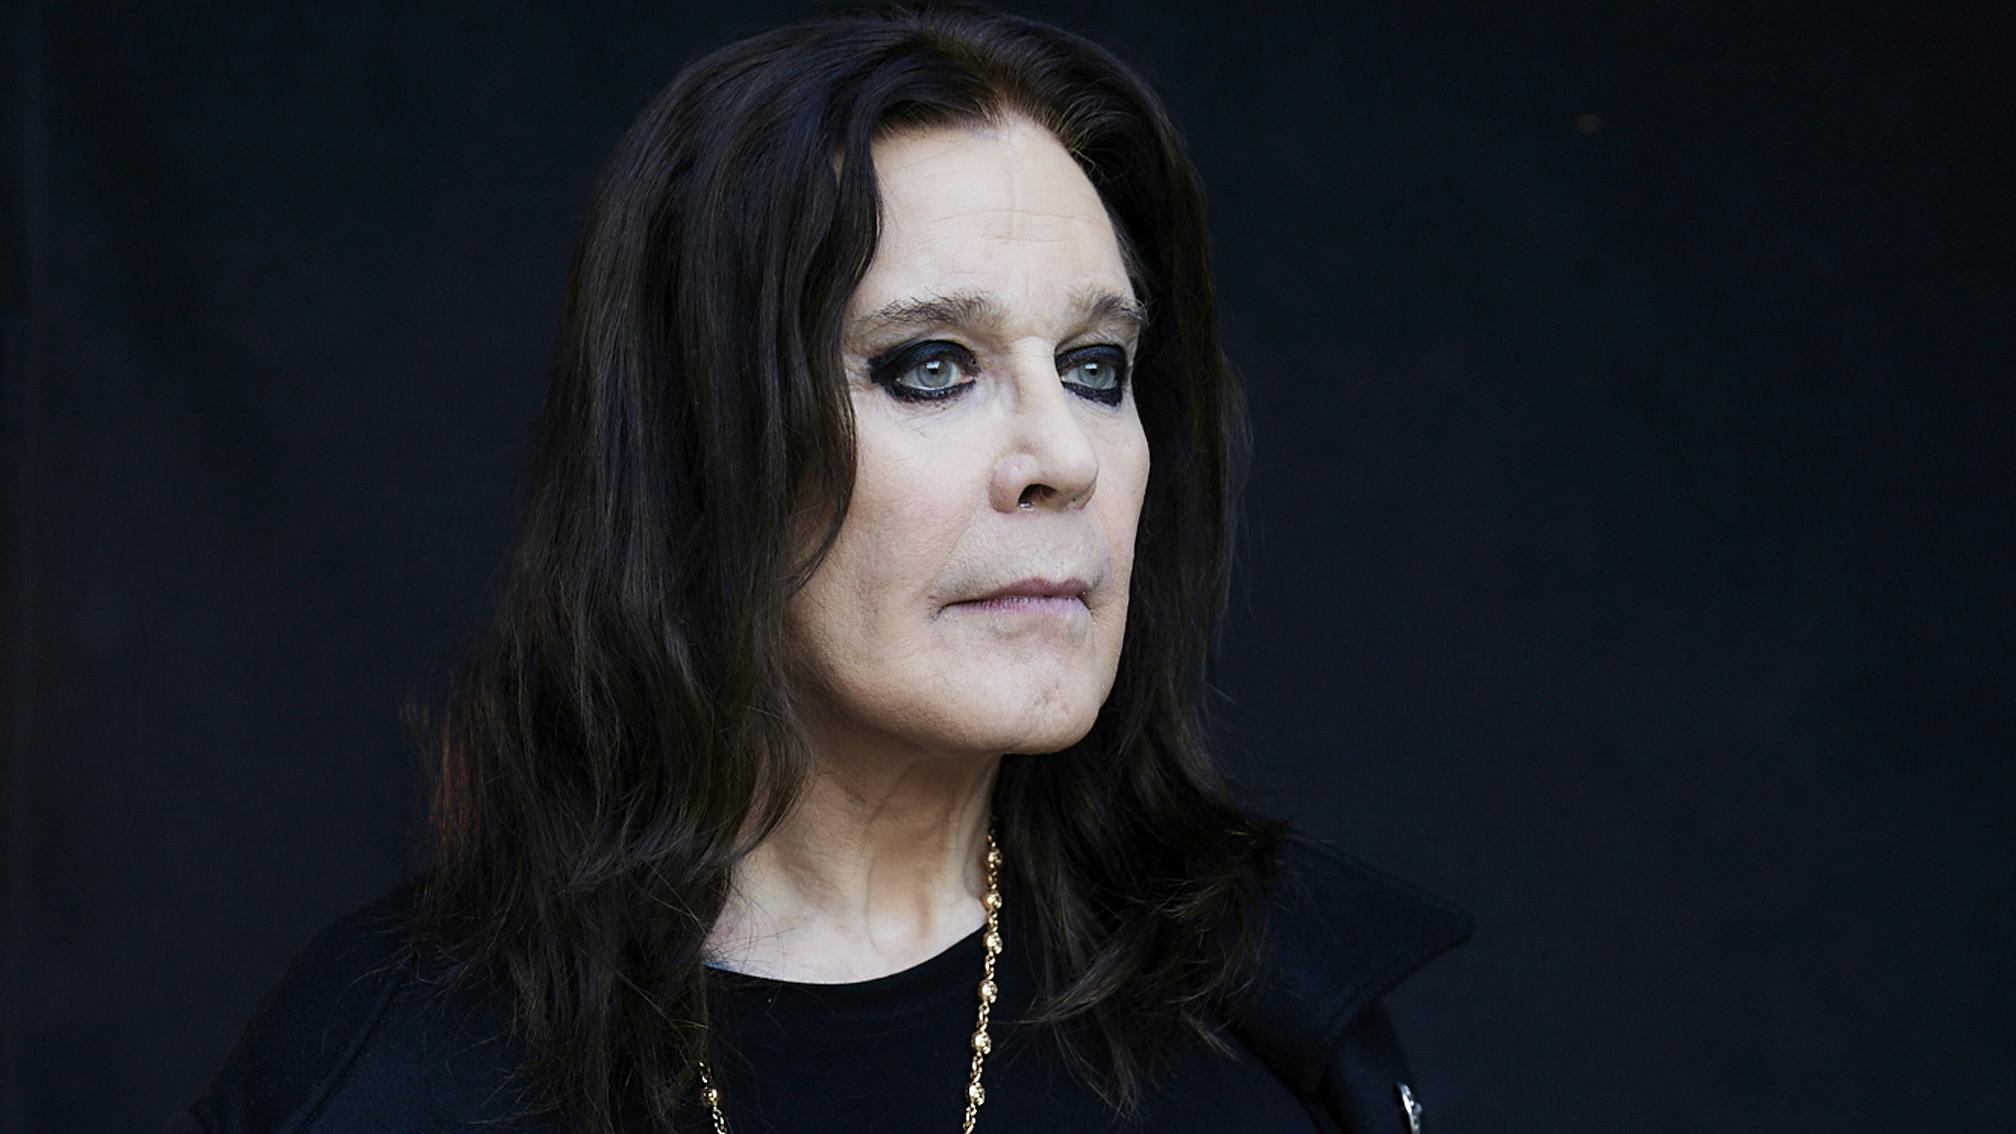 Ozzy Osbourne Confirms His U.S. Tour Is Postponed, Not Cancelled